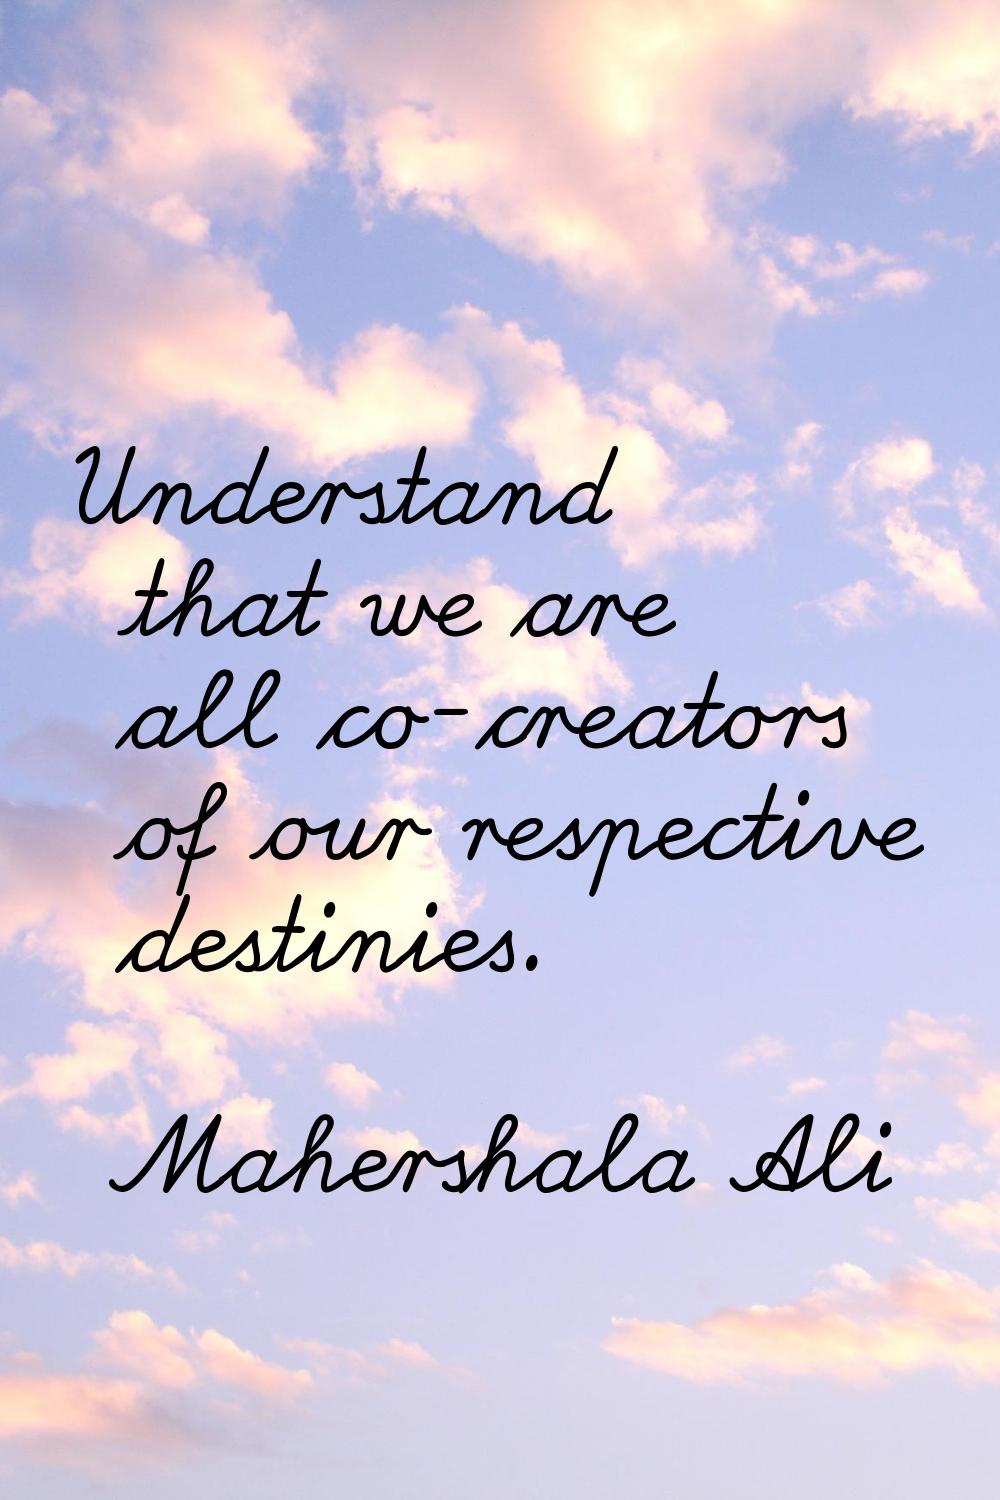 Understand that we are all co-creators of our respective destinies.